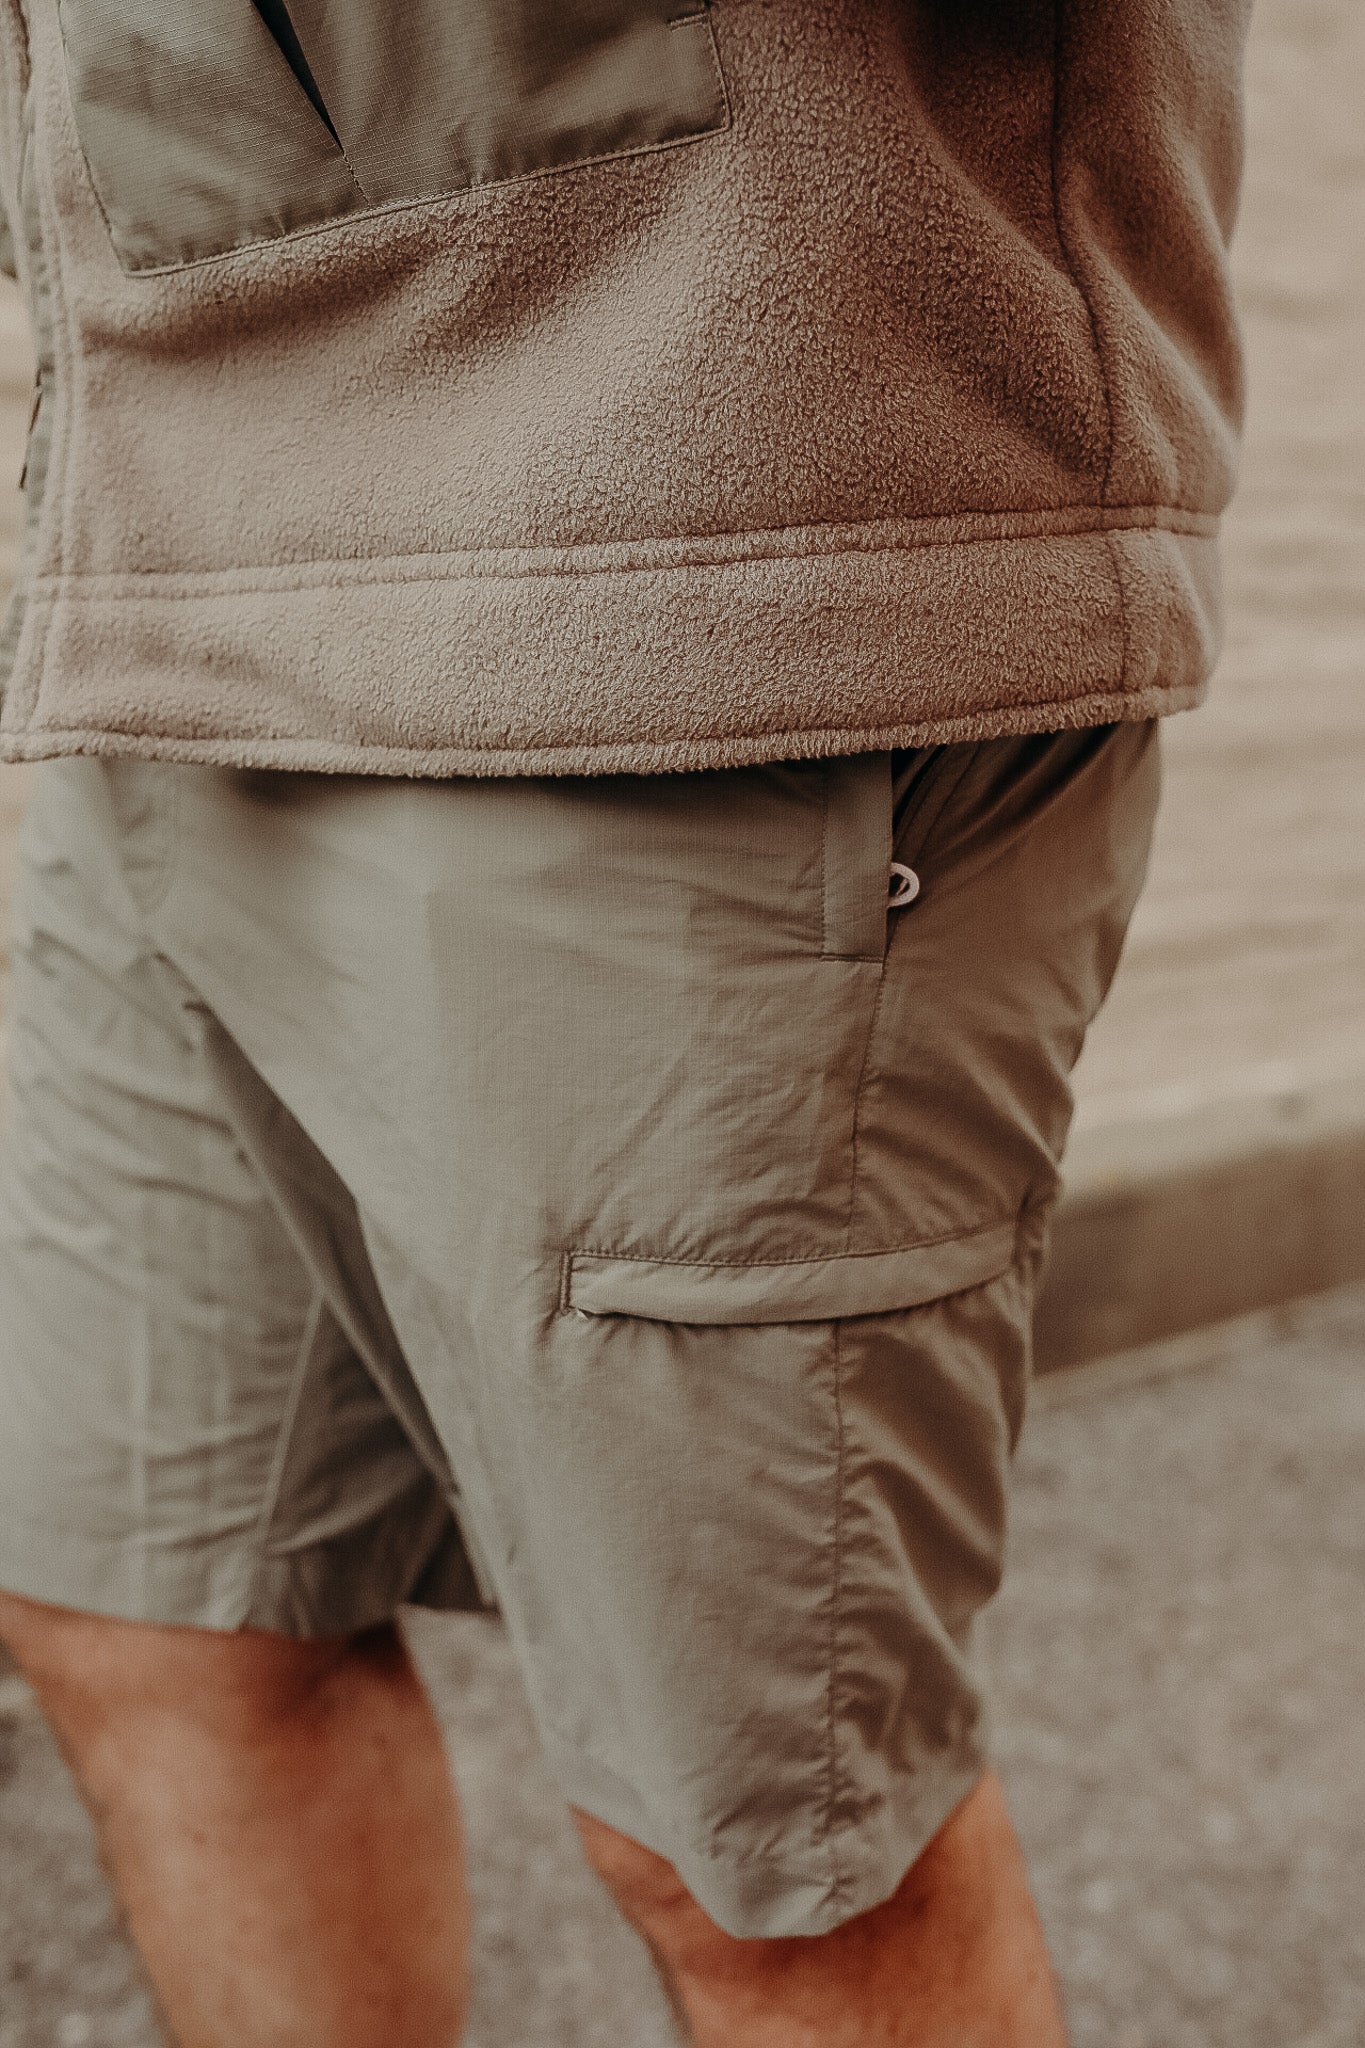 Trail Shorts in Stone